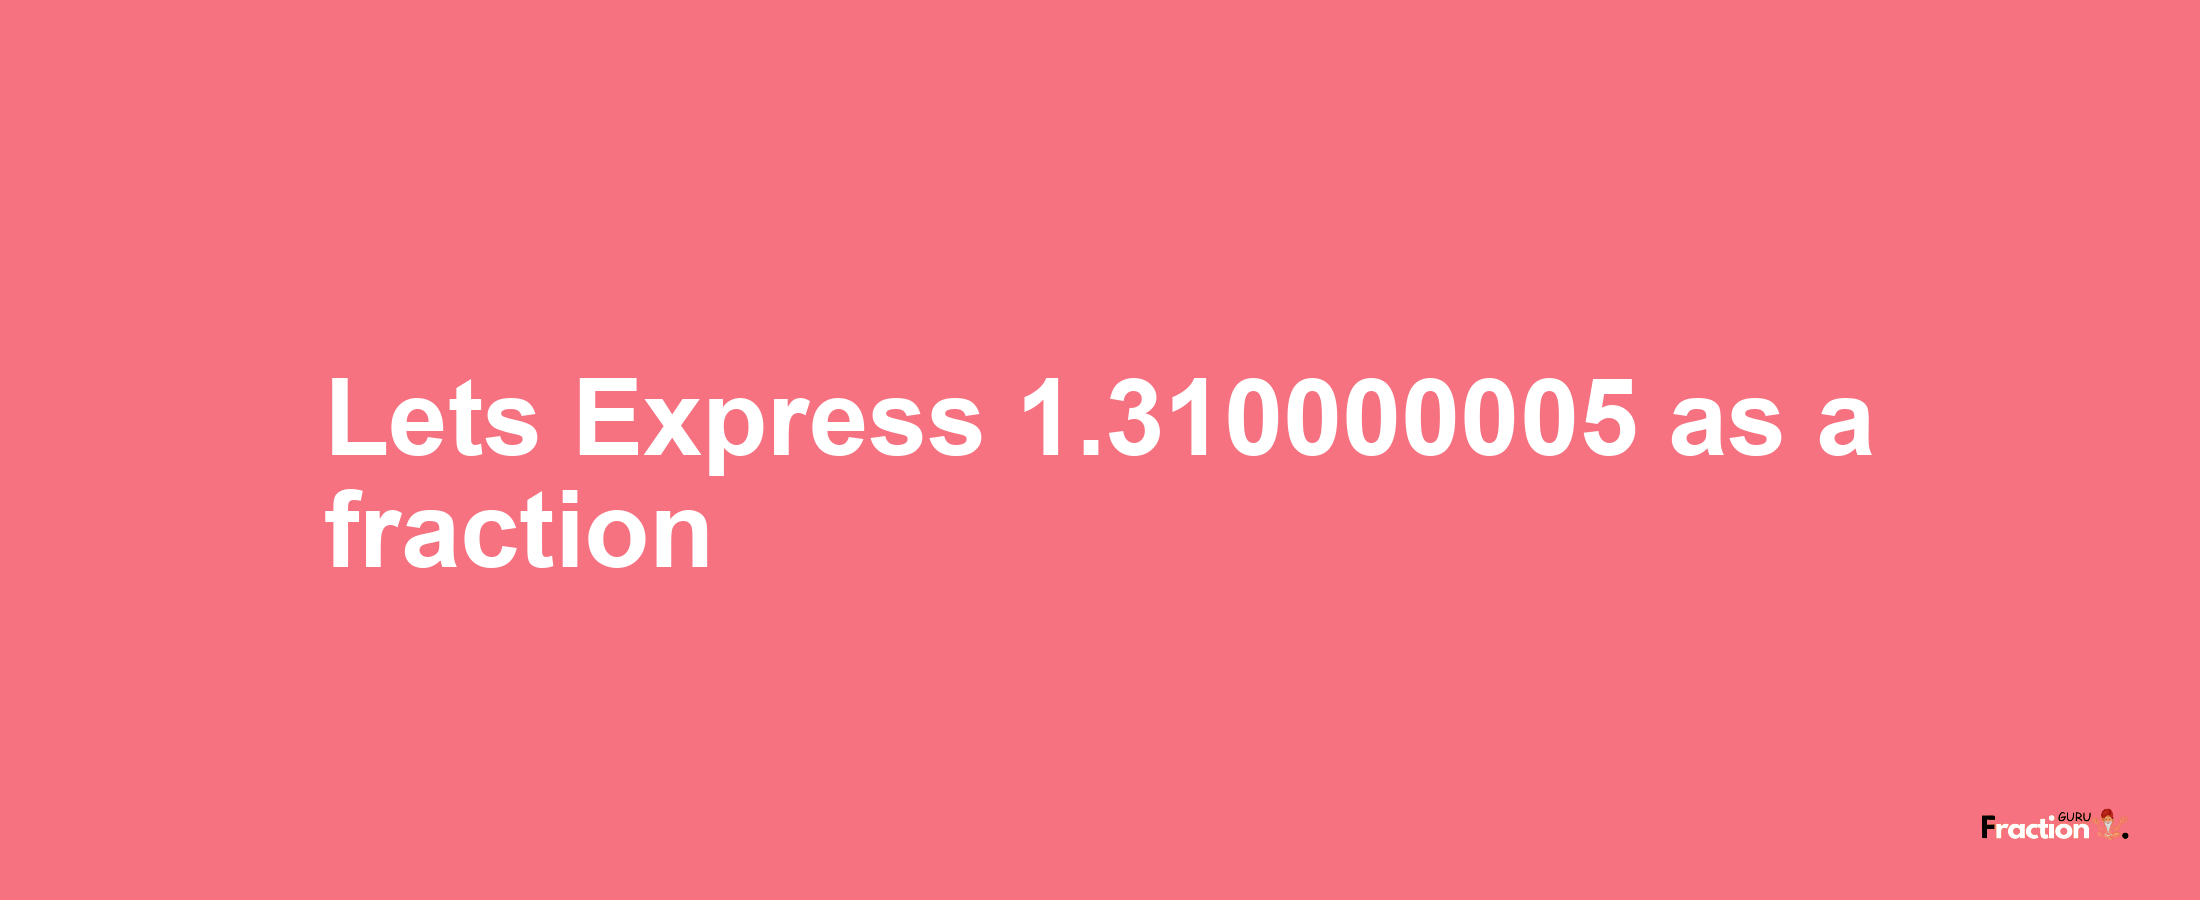 Lets Express 1.310000005 as afraction